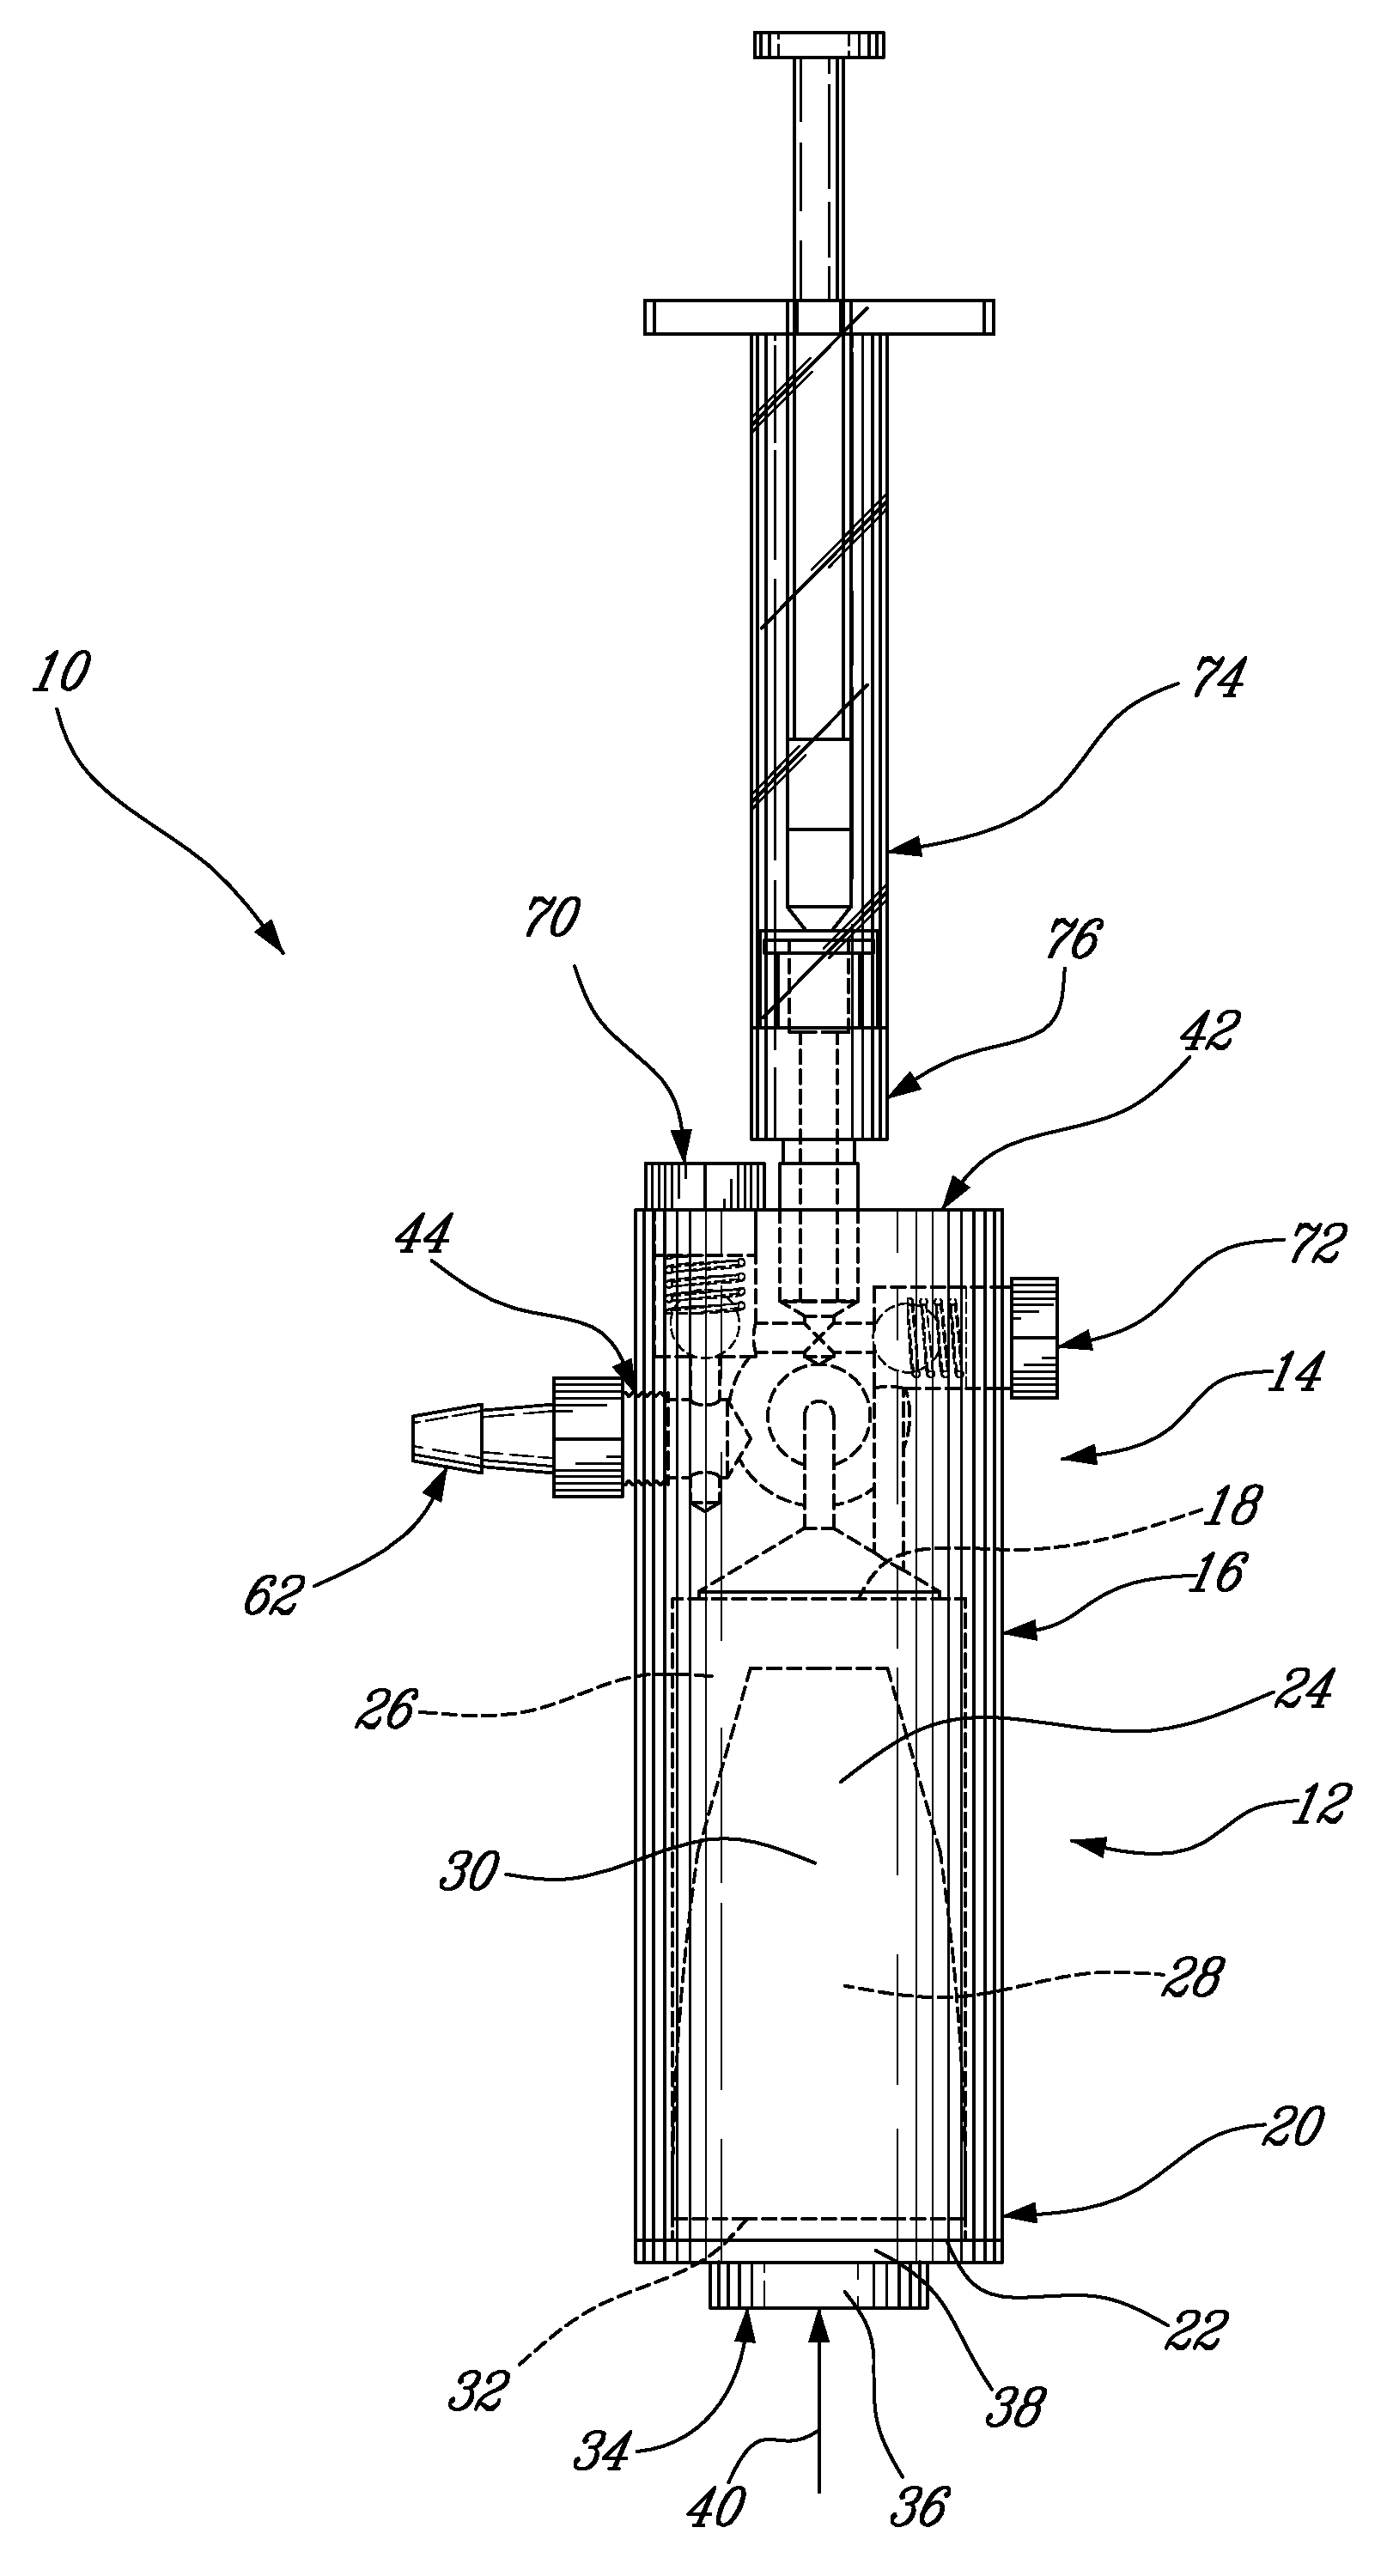 Device for injecting high viscosity material